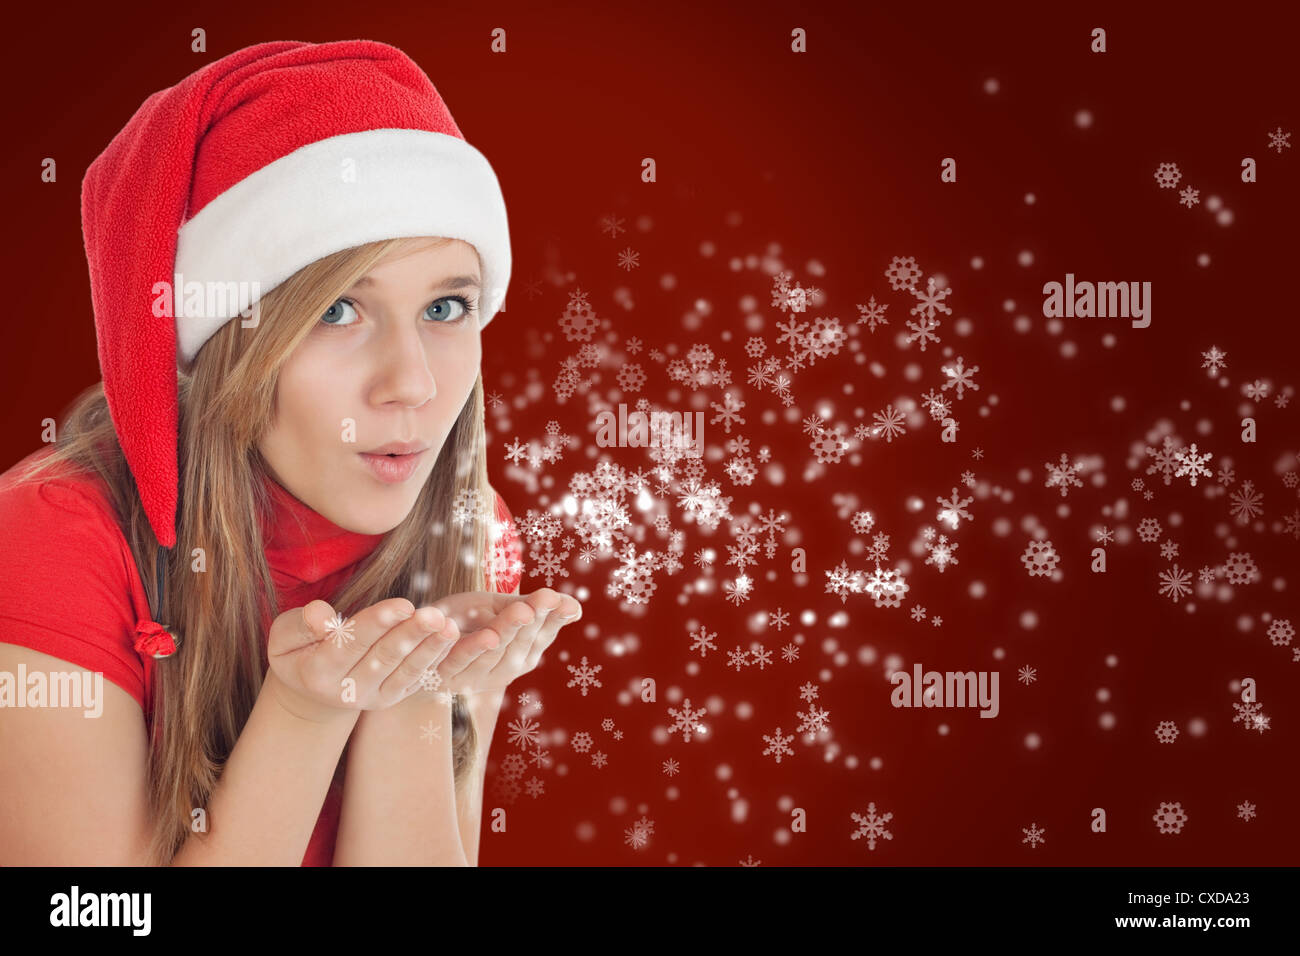 Photo of Christmas girl blowing wishes Stock Photo